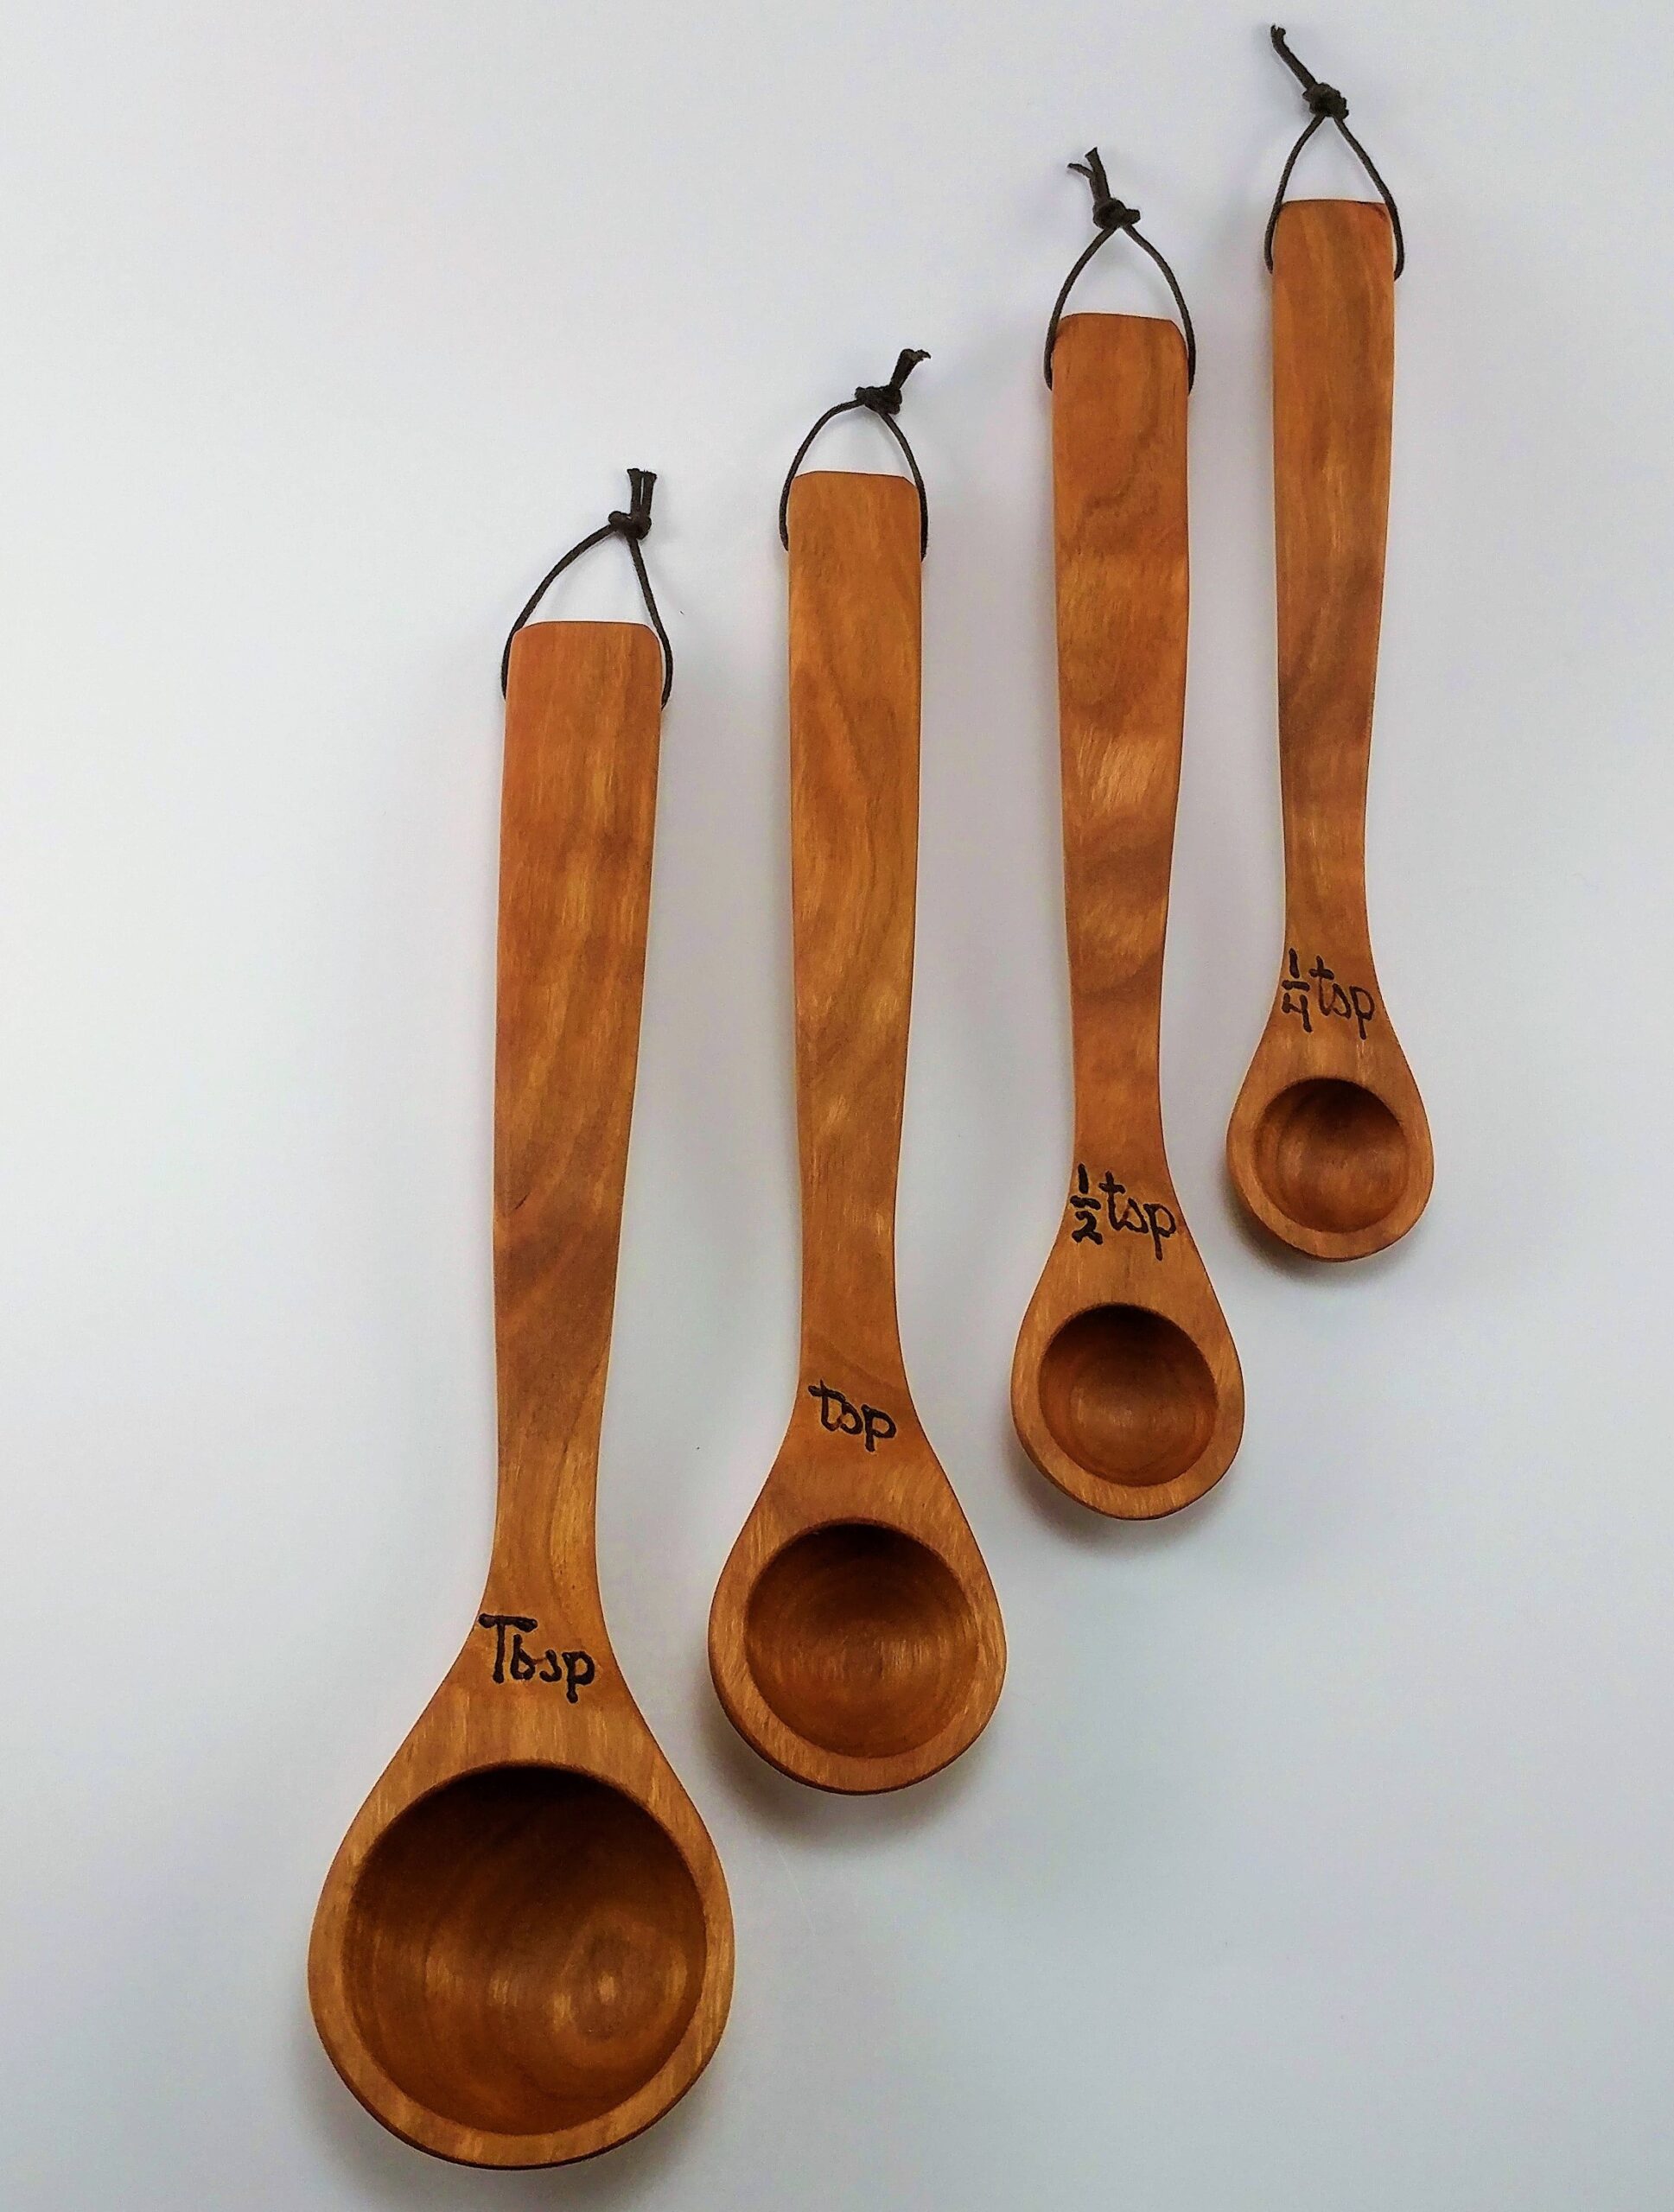 https://alleghenytreenware.com/wp-content/uploads/Long-Handled-Measuring-Spoons-2-scaled.jpg